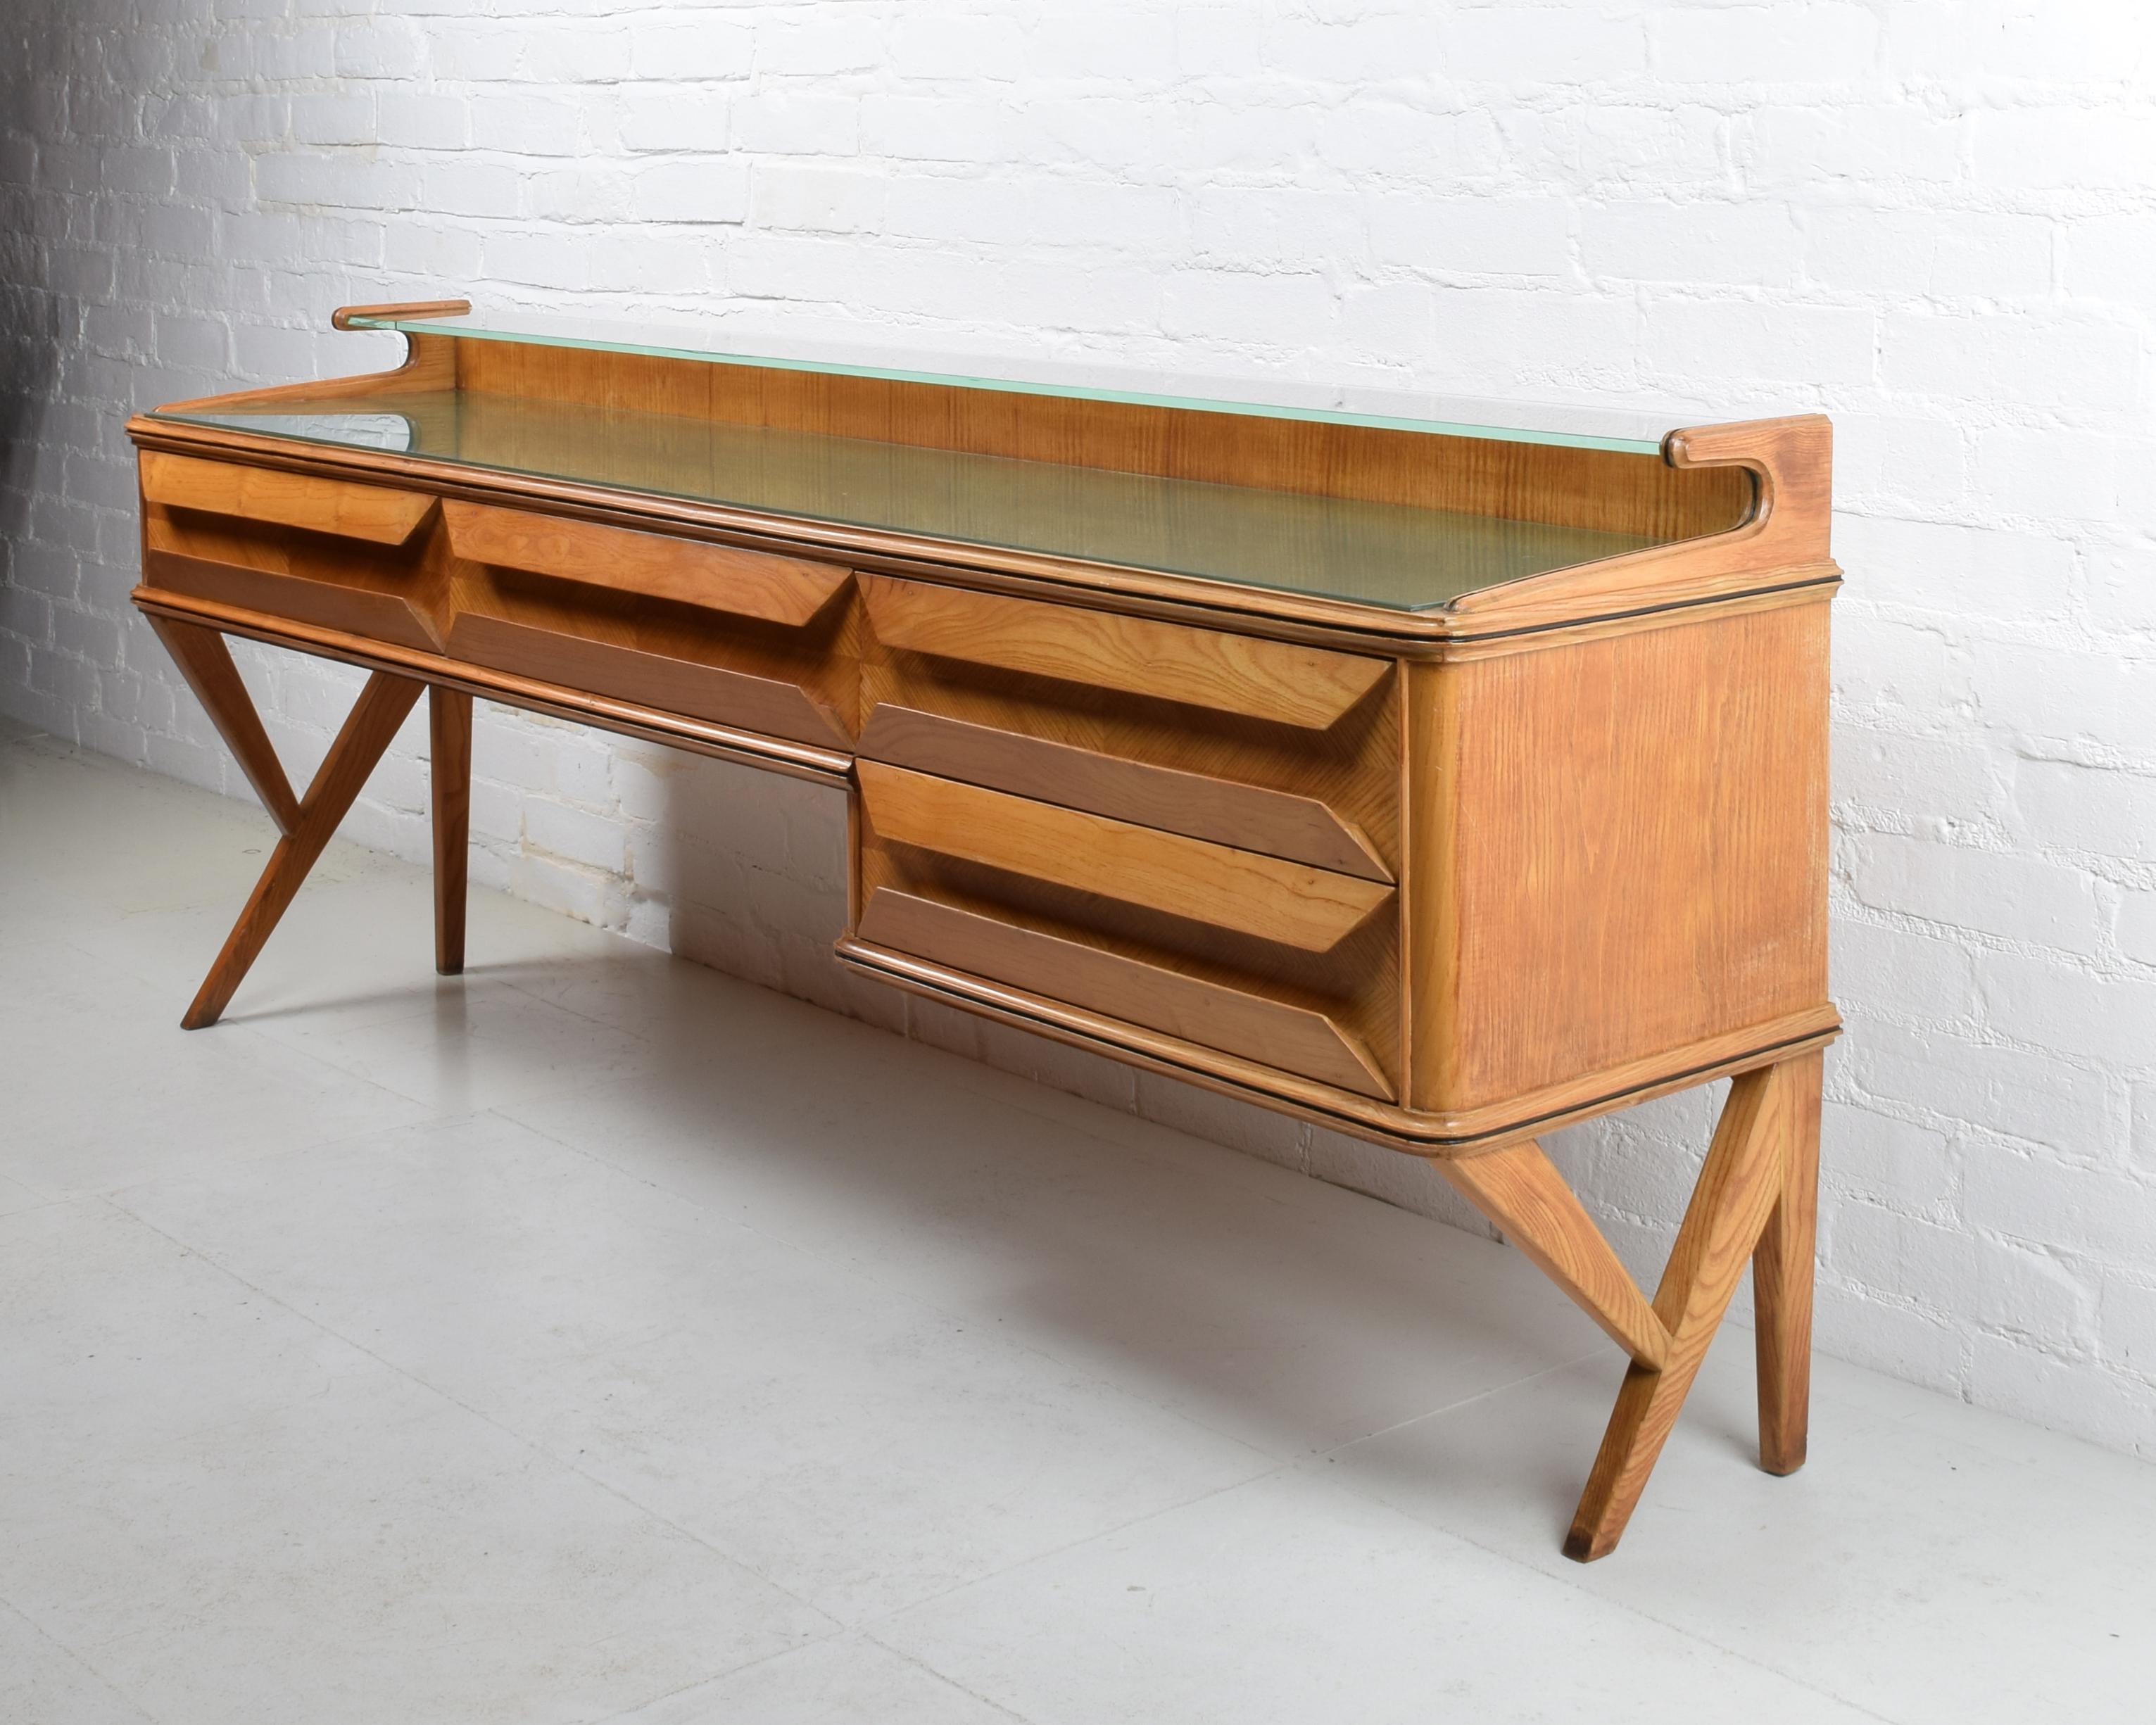 Vittorio Dassi, Italy (designer)

Sideboard
Produced at Dassi Mobili Moderni, Lissone, c. 1955
Wood, glass
Beautiful original condition. Some lifting to the backpainting of the glass.

Dimensions approx.:  W 193 cm, D 44 cm, H 78.5 cm (68 cm to main